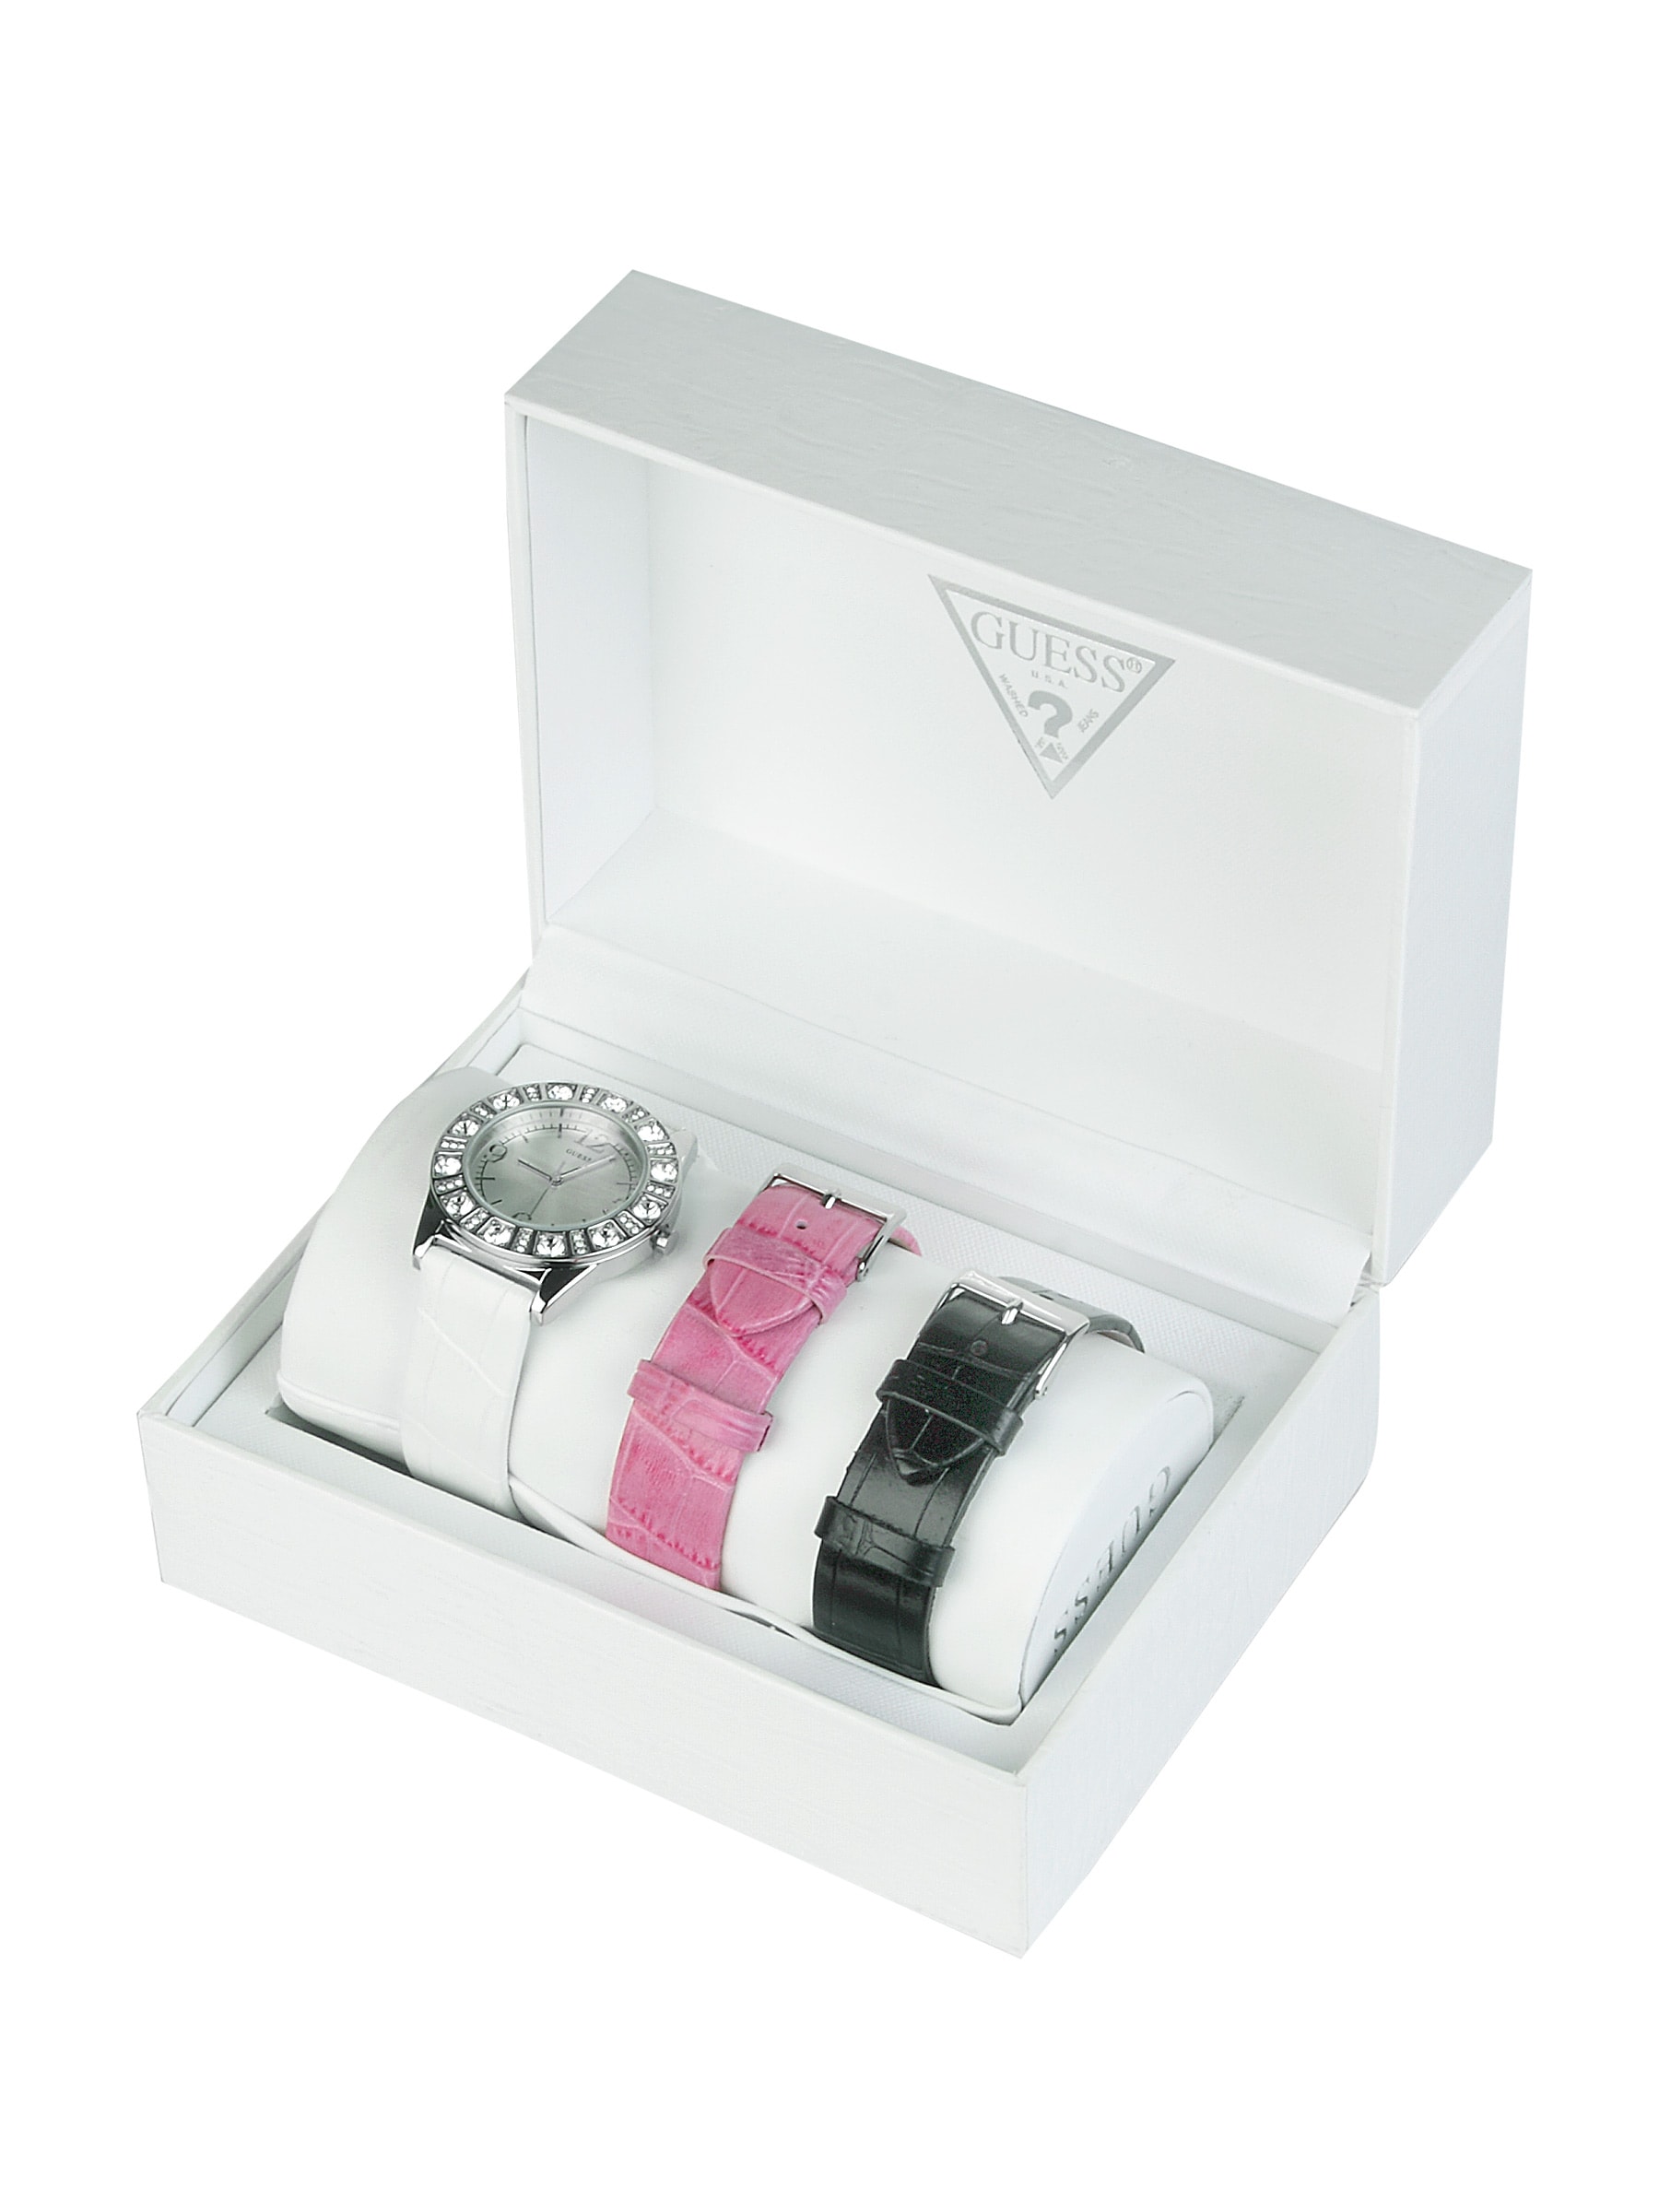 Guess Women Sparkle Box Set Watch With Interchangeable Straps